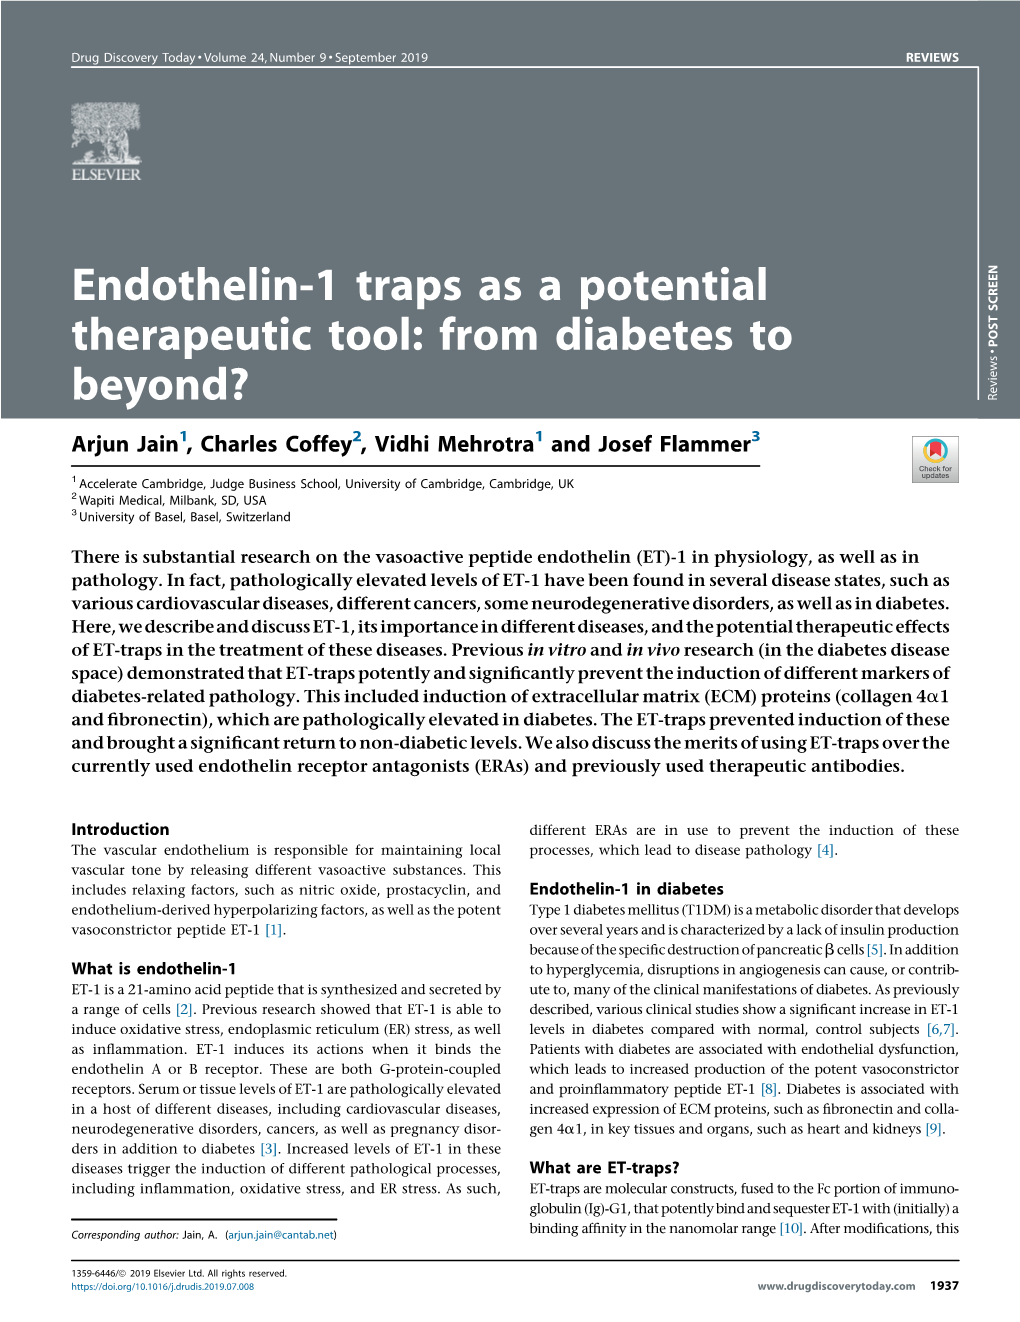 Endothelin-1 Traps As a Potential Therapeutic Tool: from Diabetes To